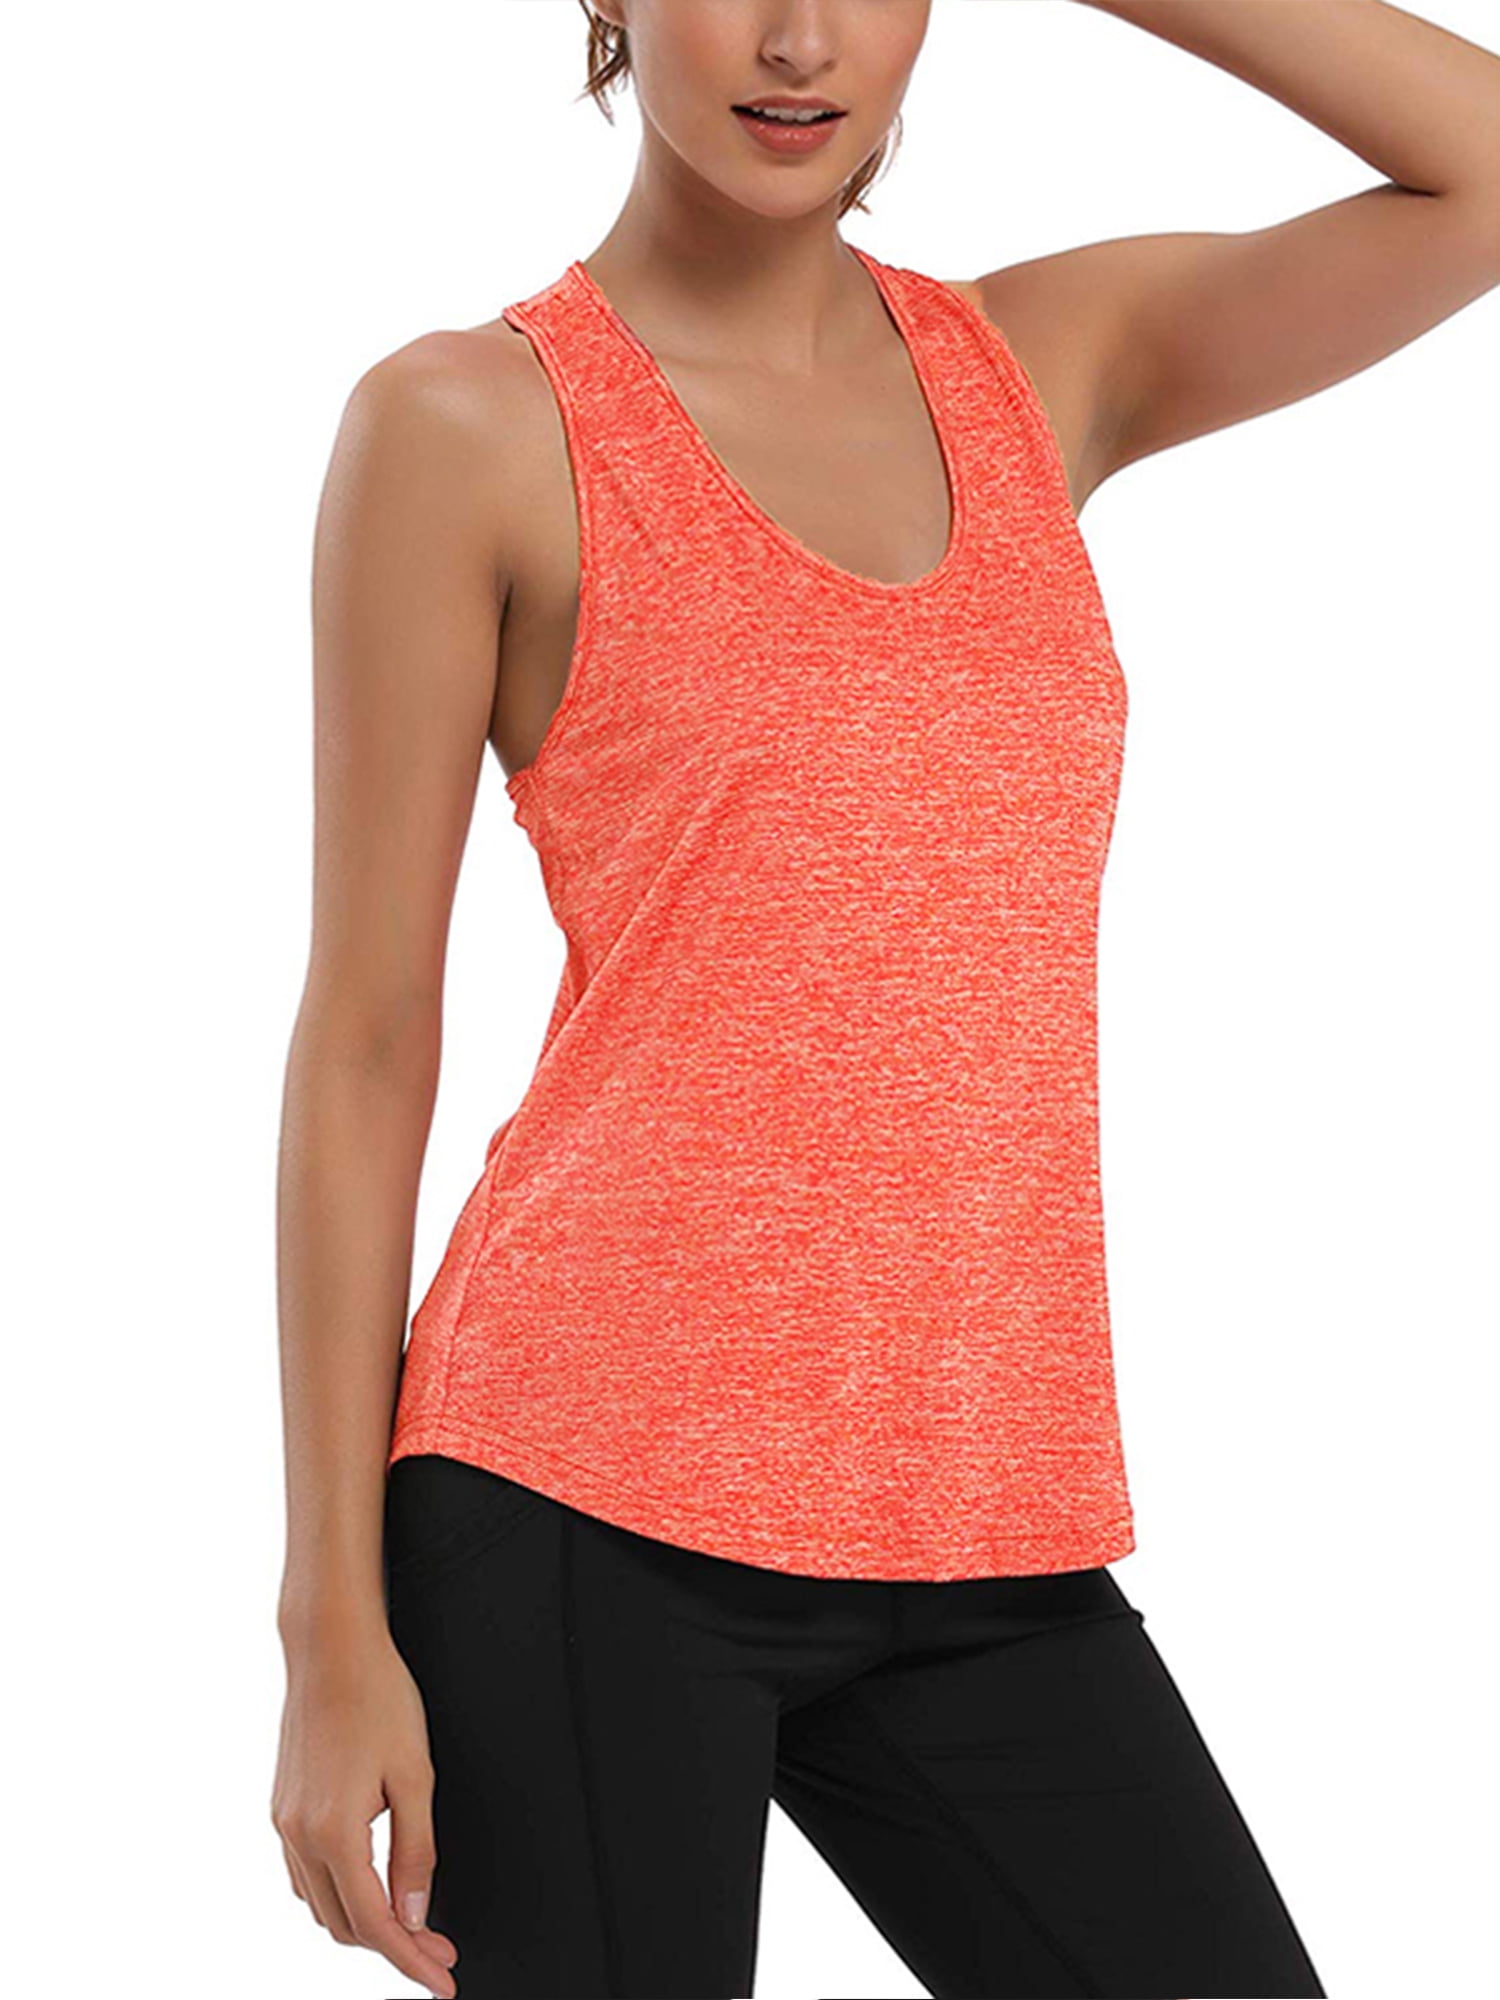 Women's Slim Sleeveless T-Shirt Solid Color Knitted O-Neck Tight Vest Sports Workout Tank Tops